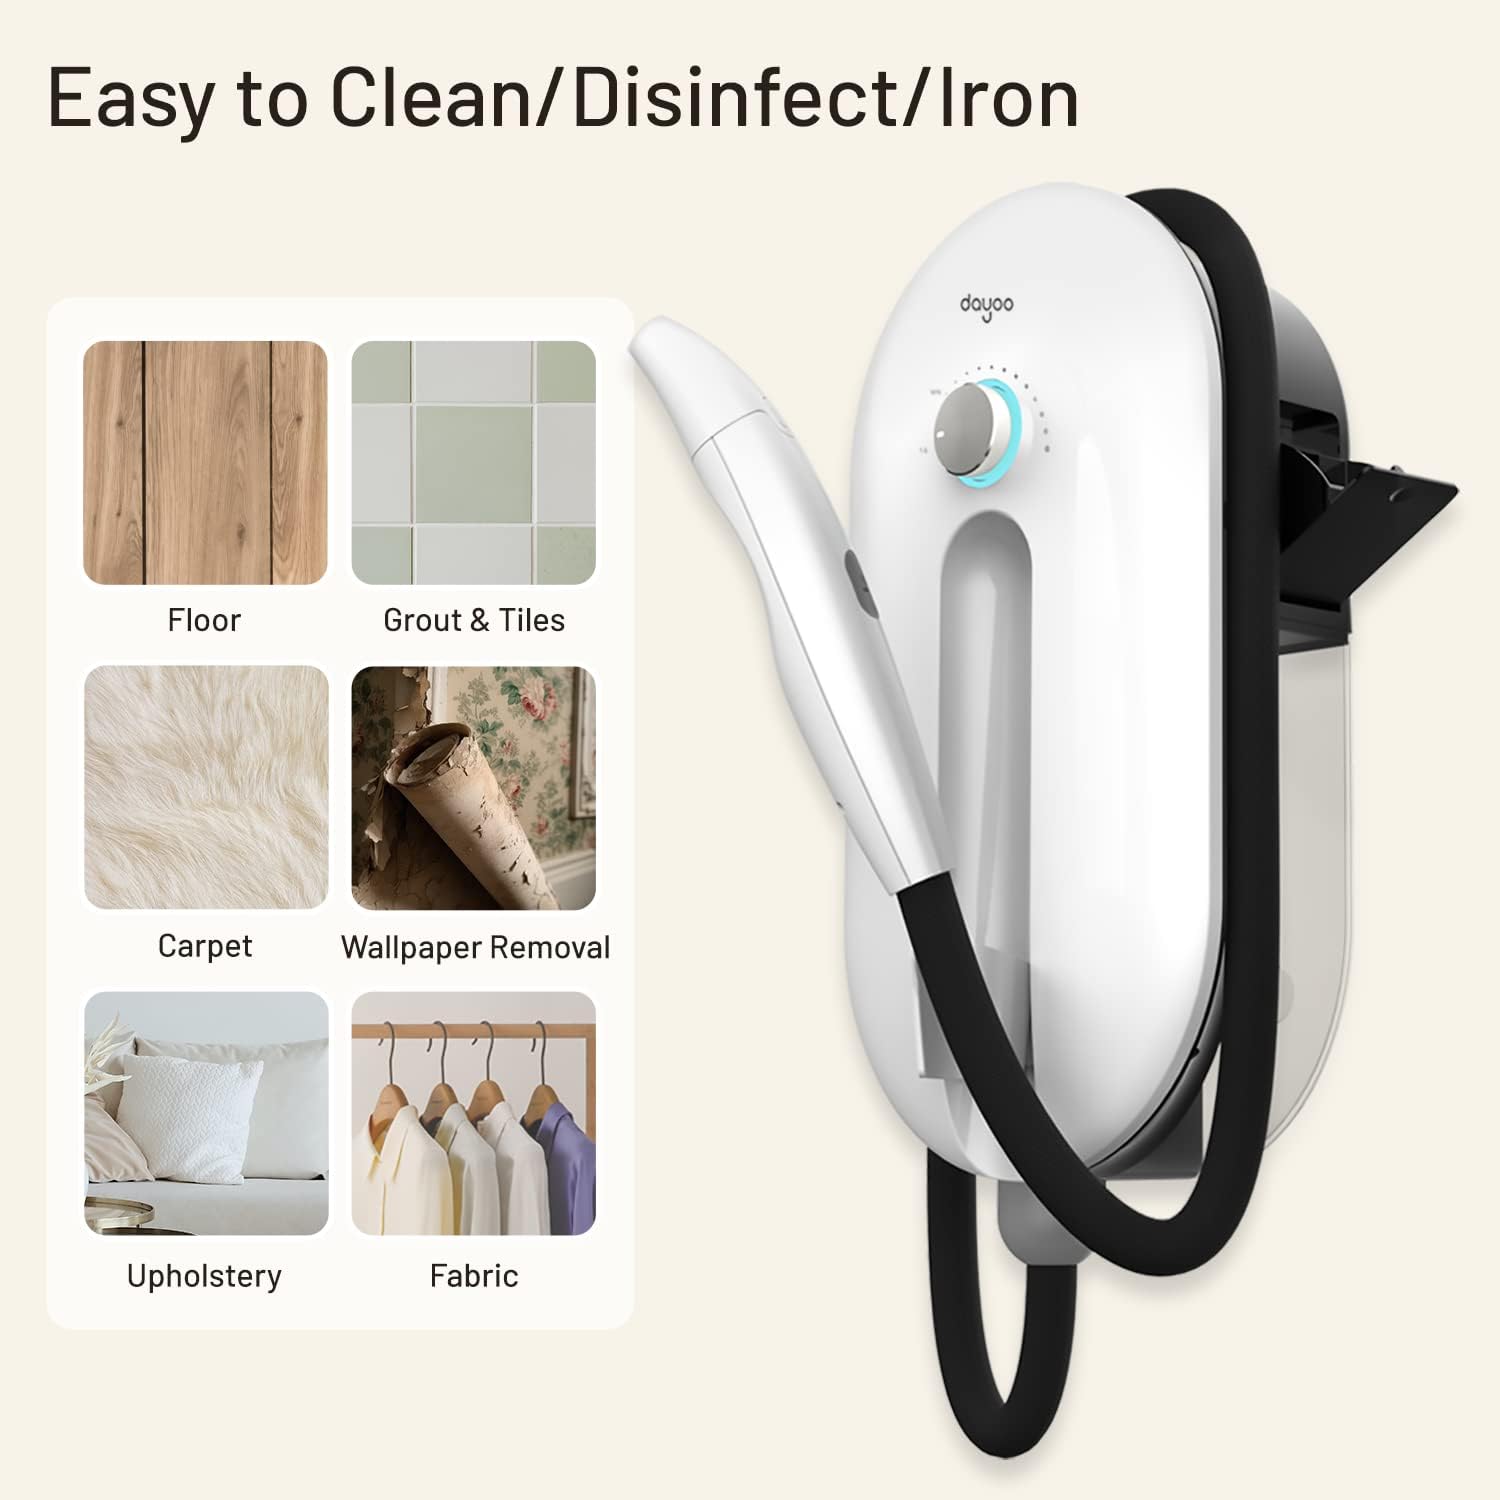 Dayoo Portable Steam Washer PSW001